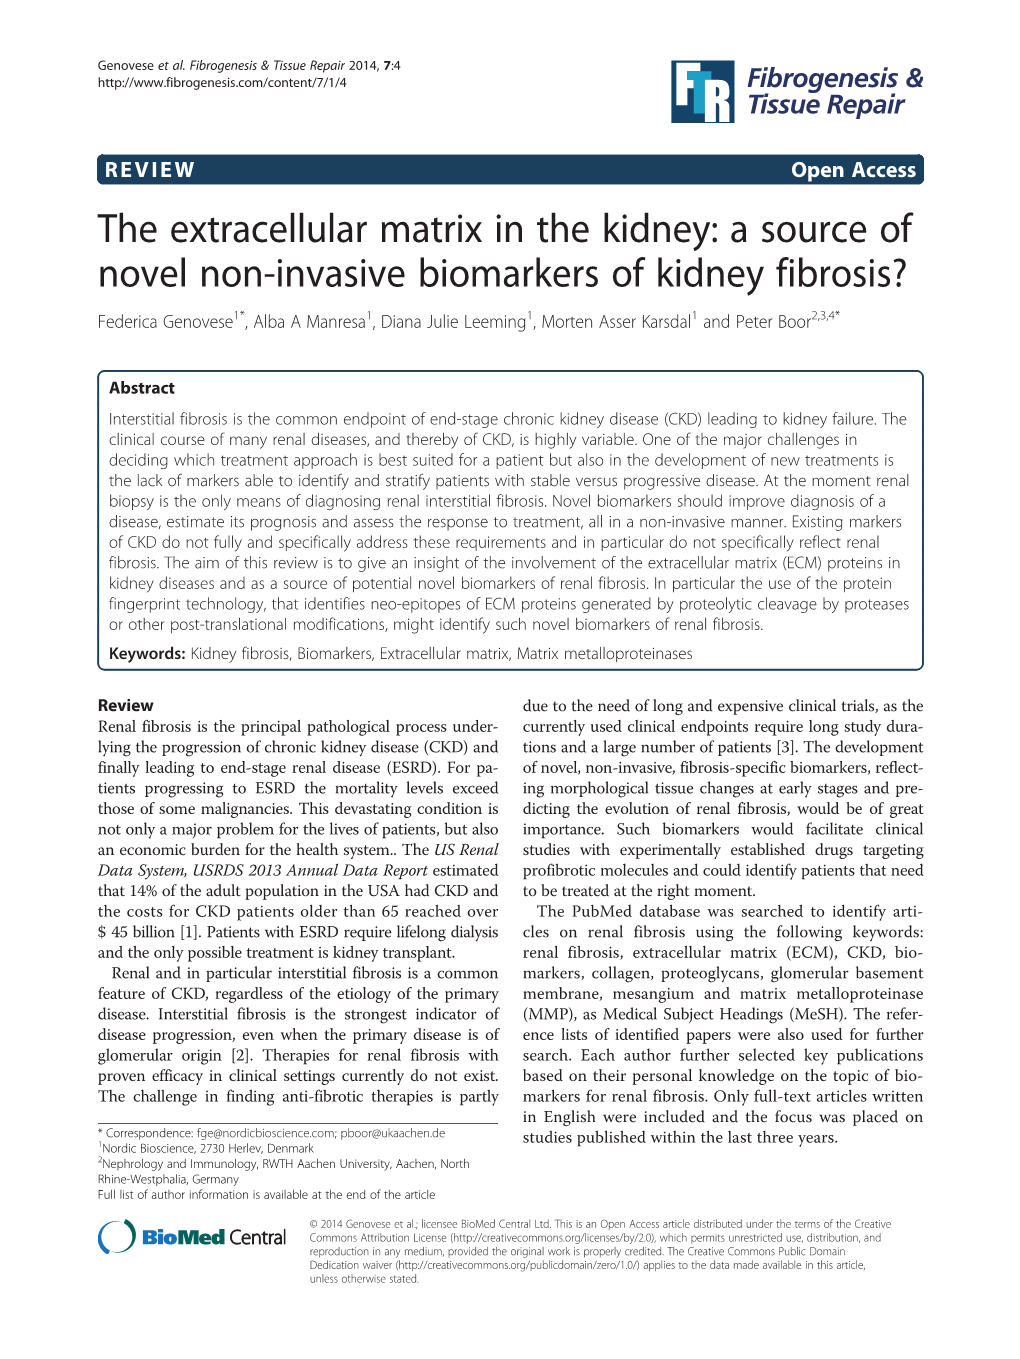 The Extracellular Matrix in the Kidney: a Source of Novel Non-Invasive